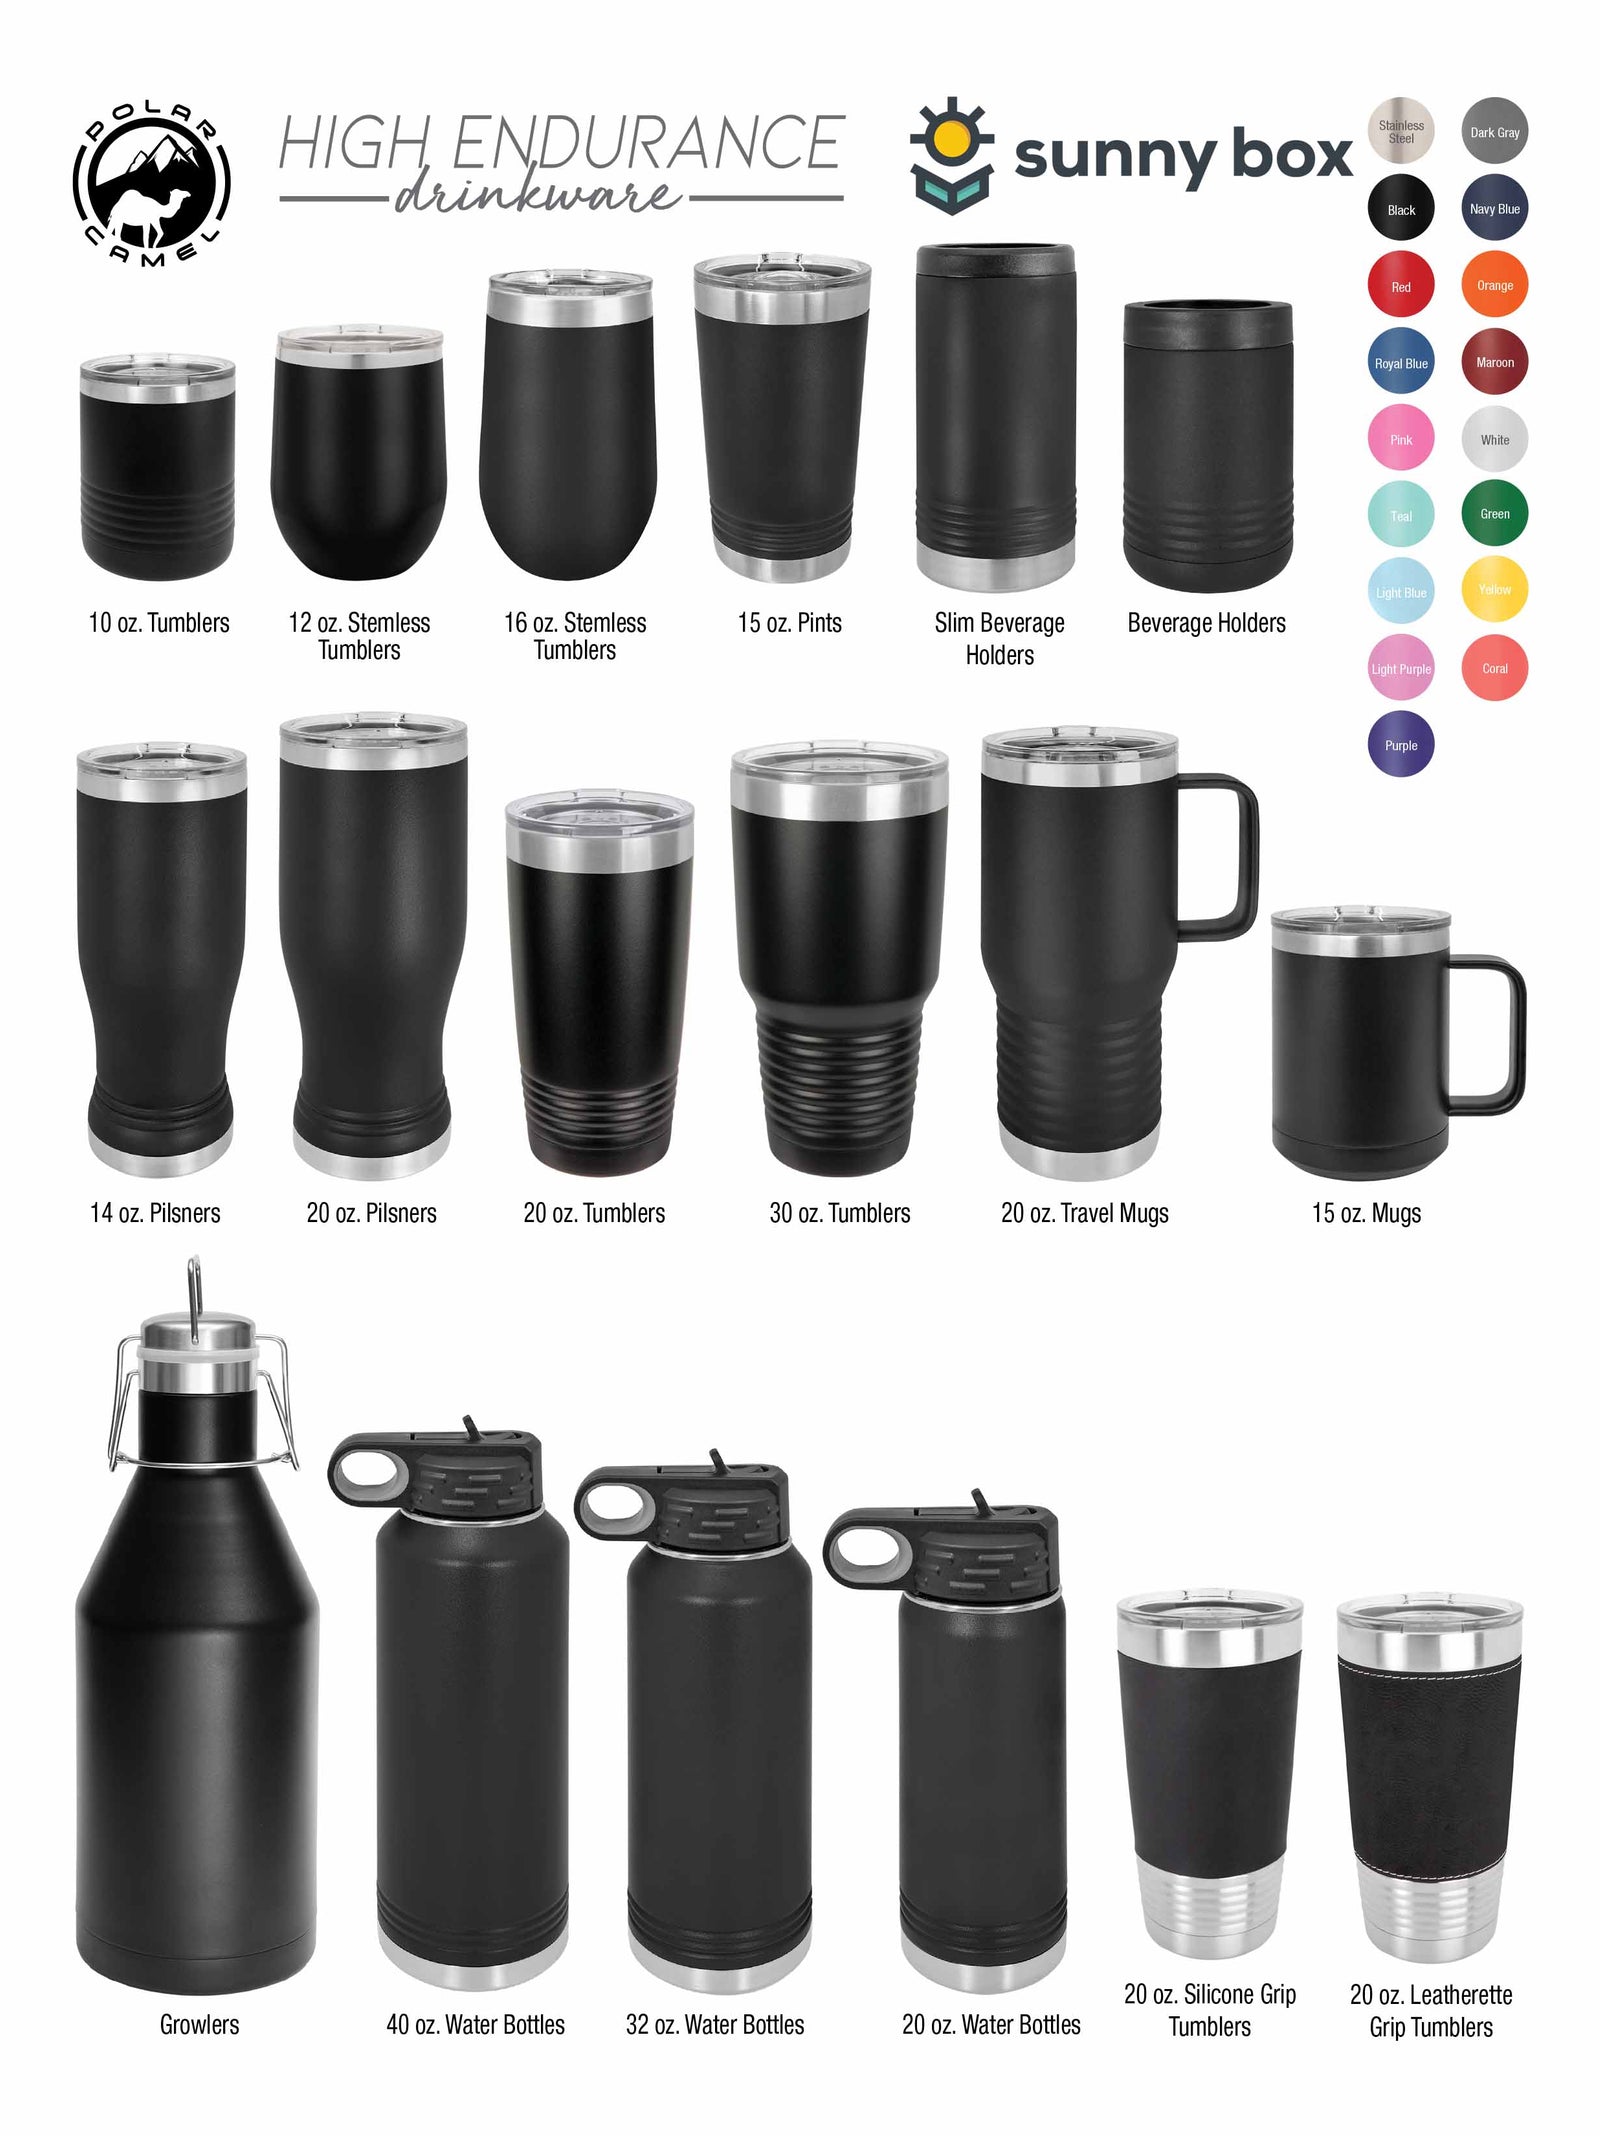 I have enough tumblers but when I saw that @Ello Products came out